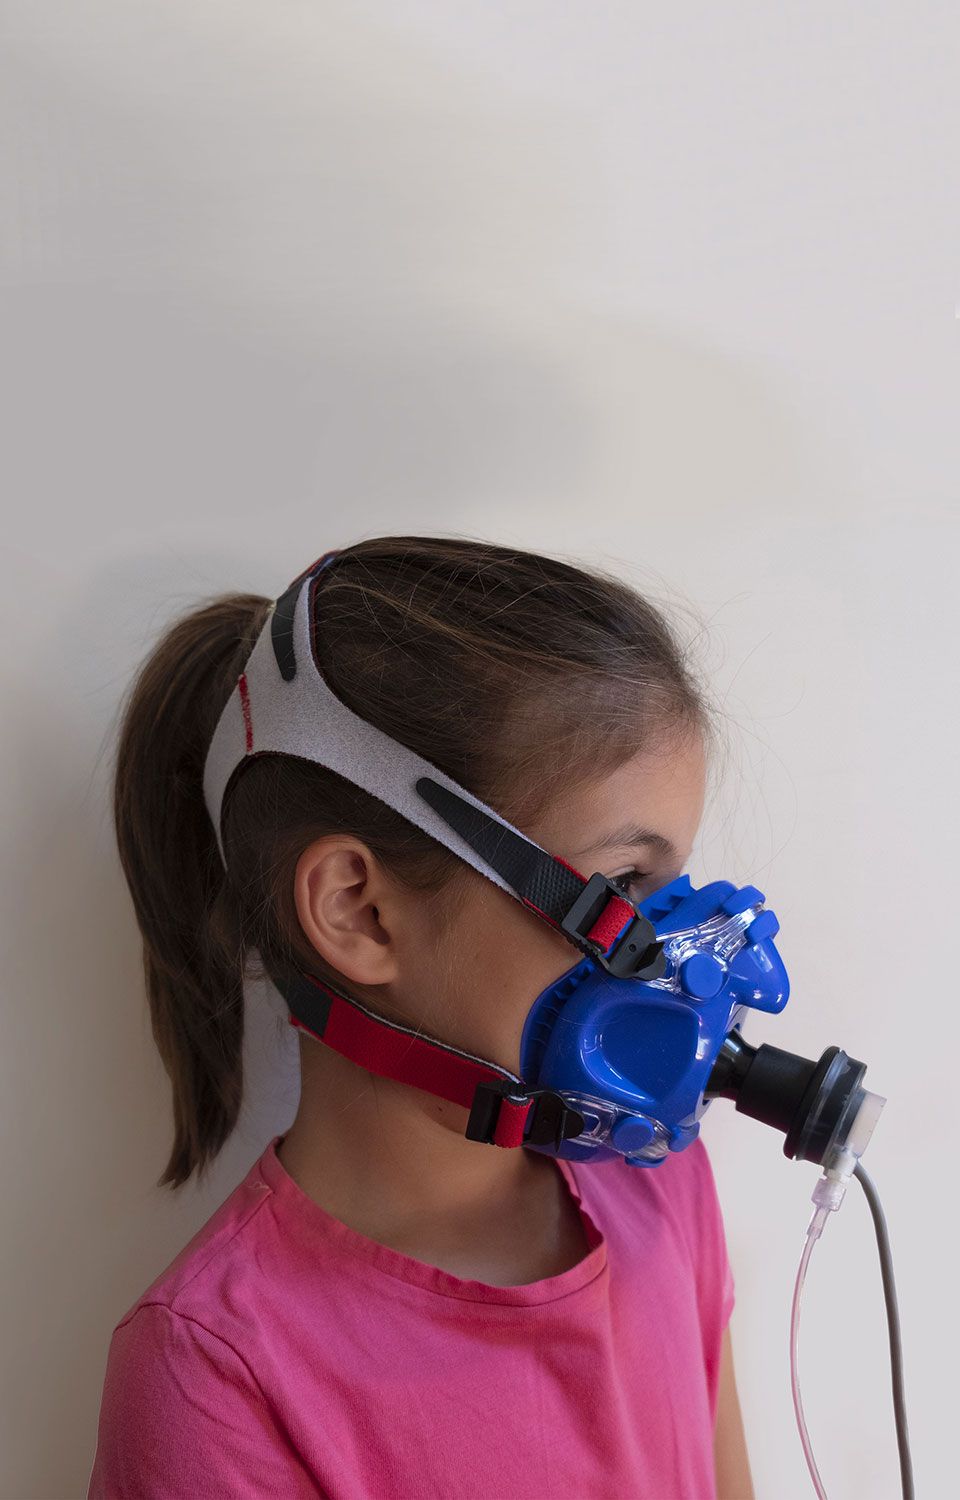 Q-NRG - Girl Resting Energy Expenditure mesurements with mask